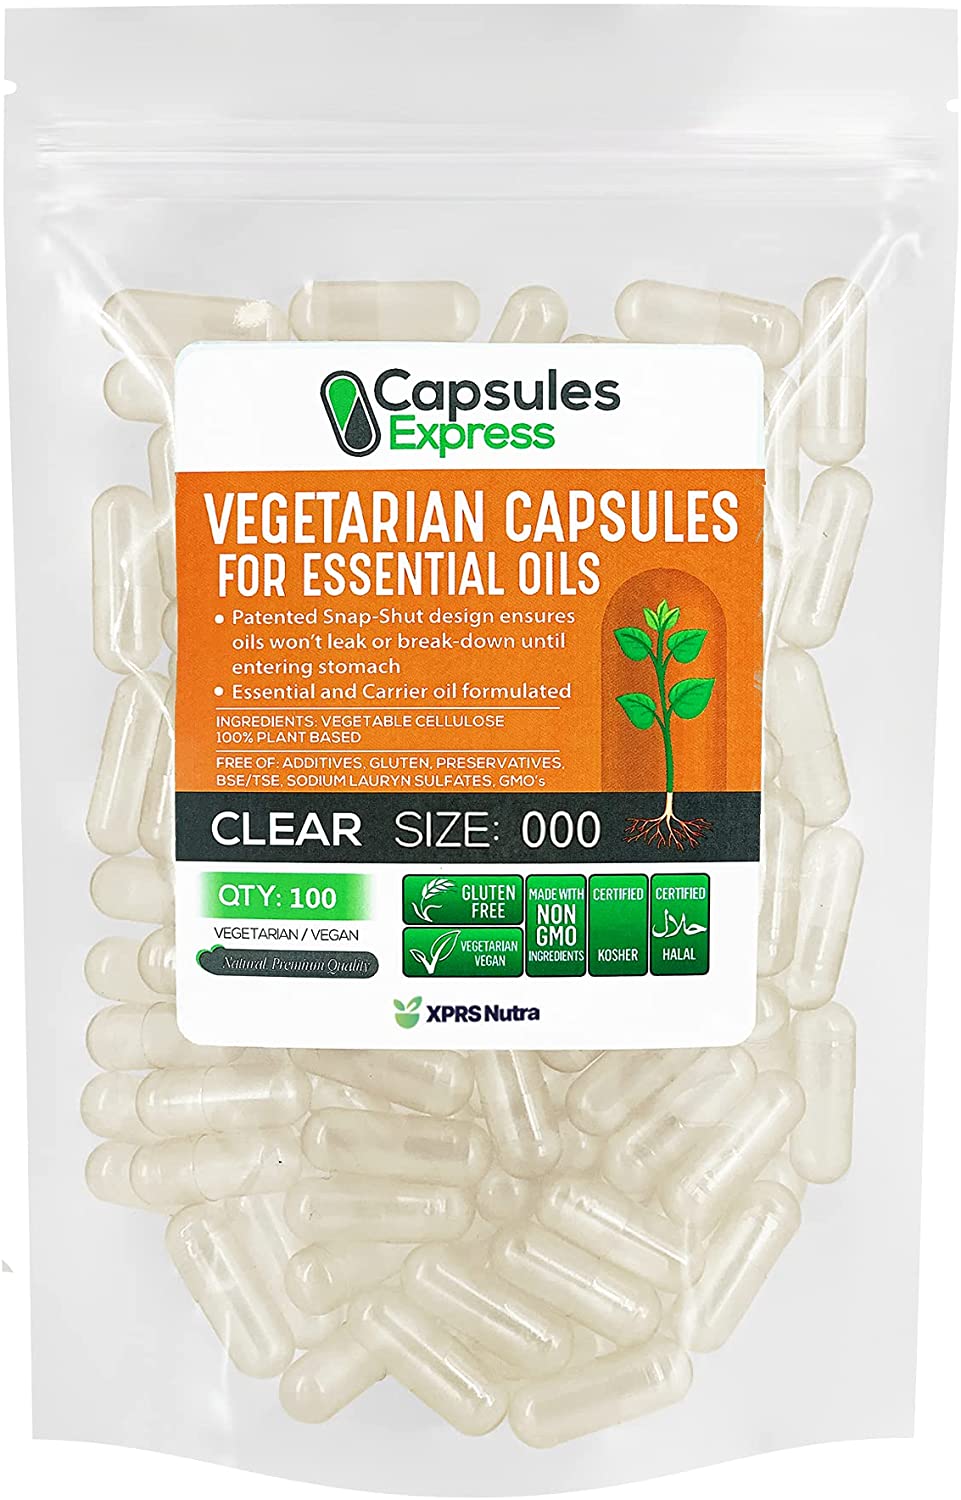 Size 000 Clear Empty Vegan Capsules for Essential Oils